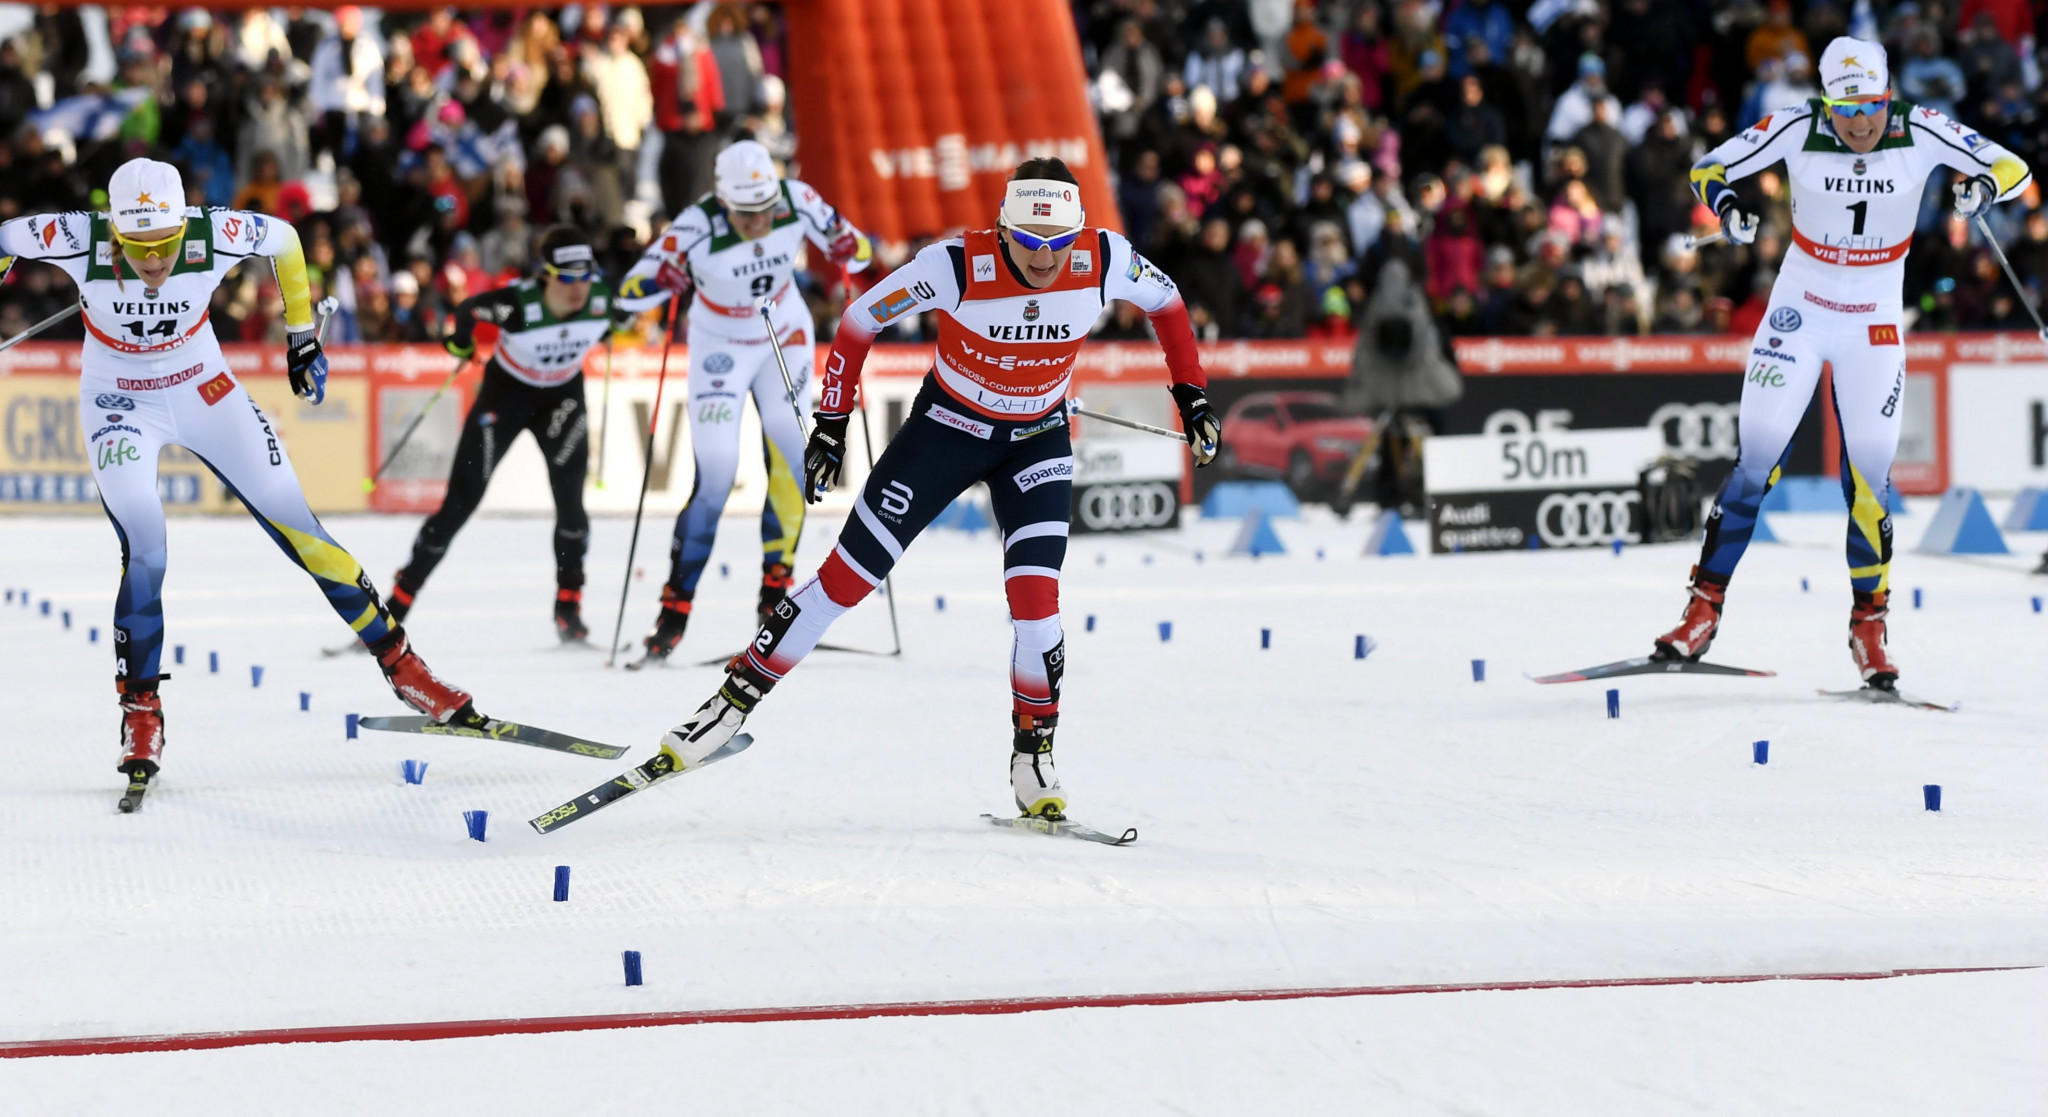 Falla aims to clinch overall sprint title on home snow at FIS Cross-Country World Cup in Drammen